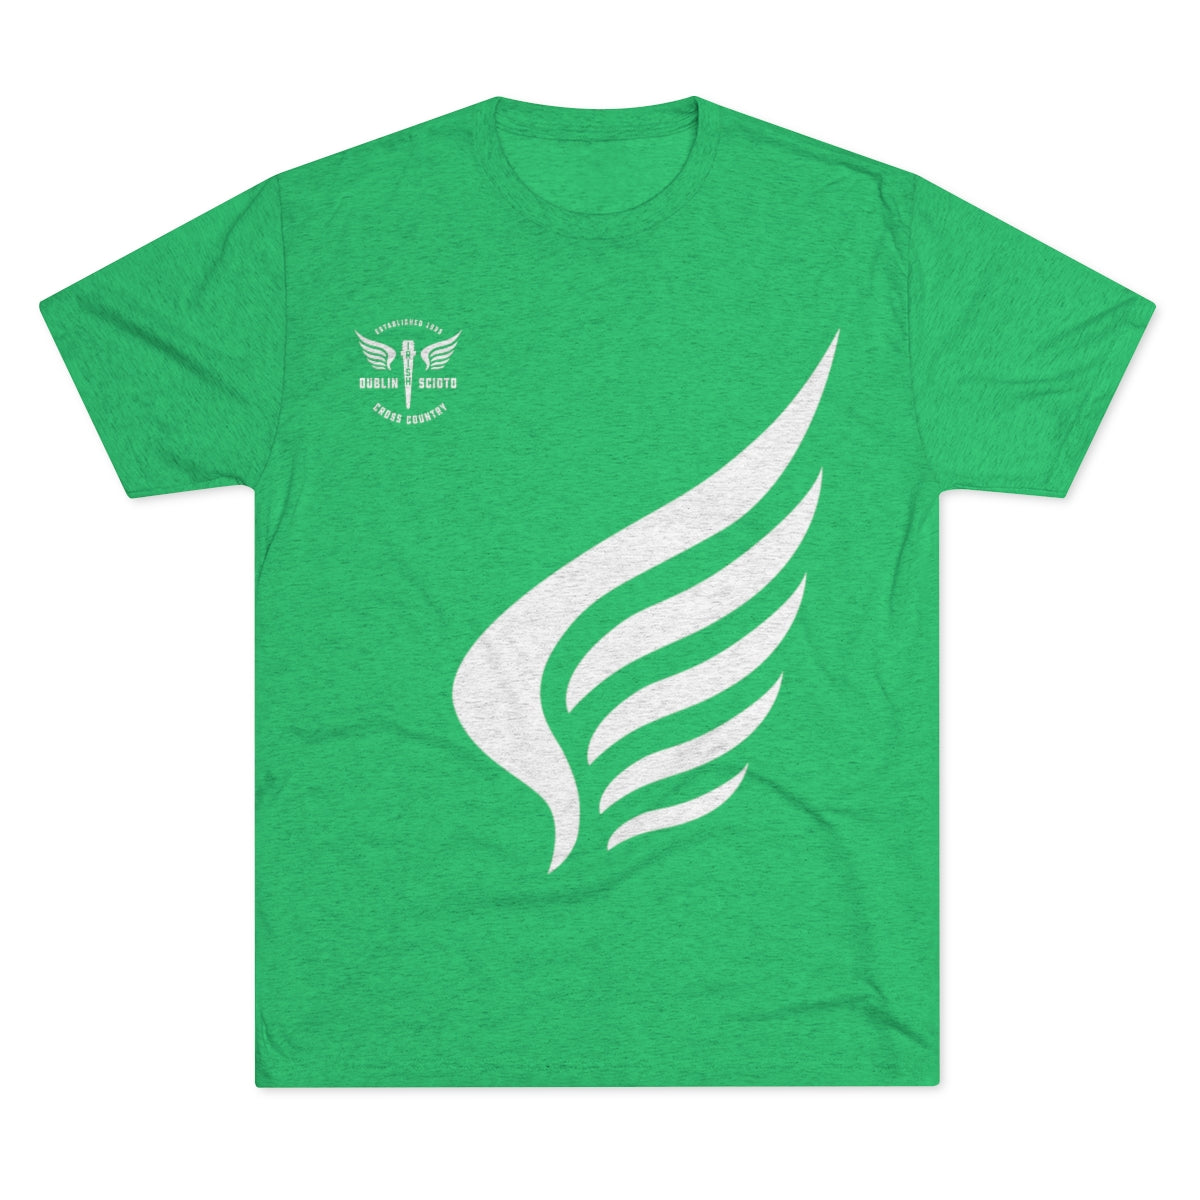 Running wing graphic/SCIOTO XC Winged Spike — Men's Tri-Blend Crew Tee